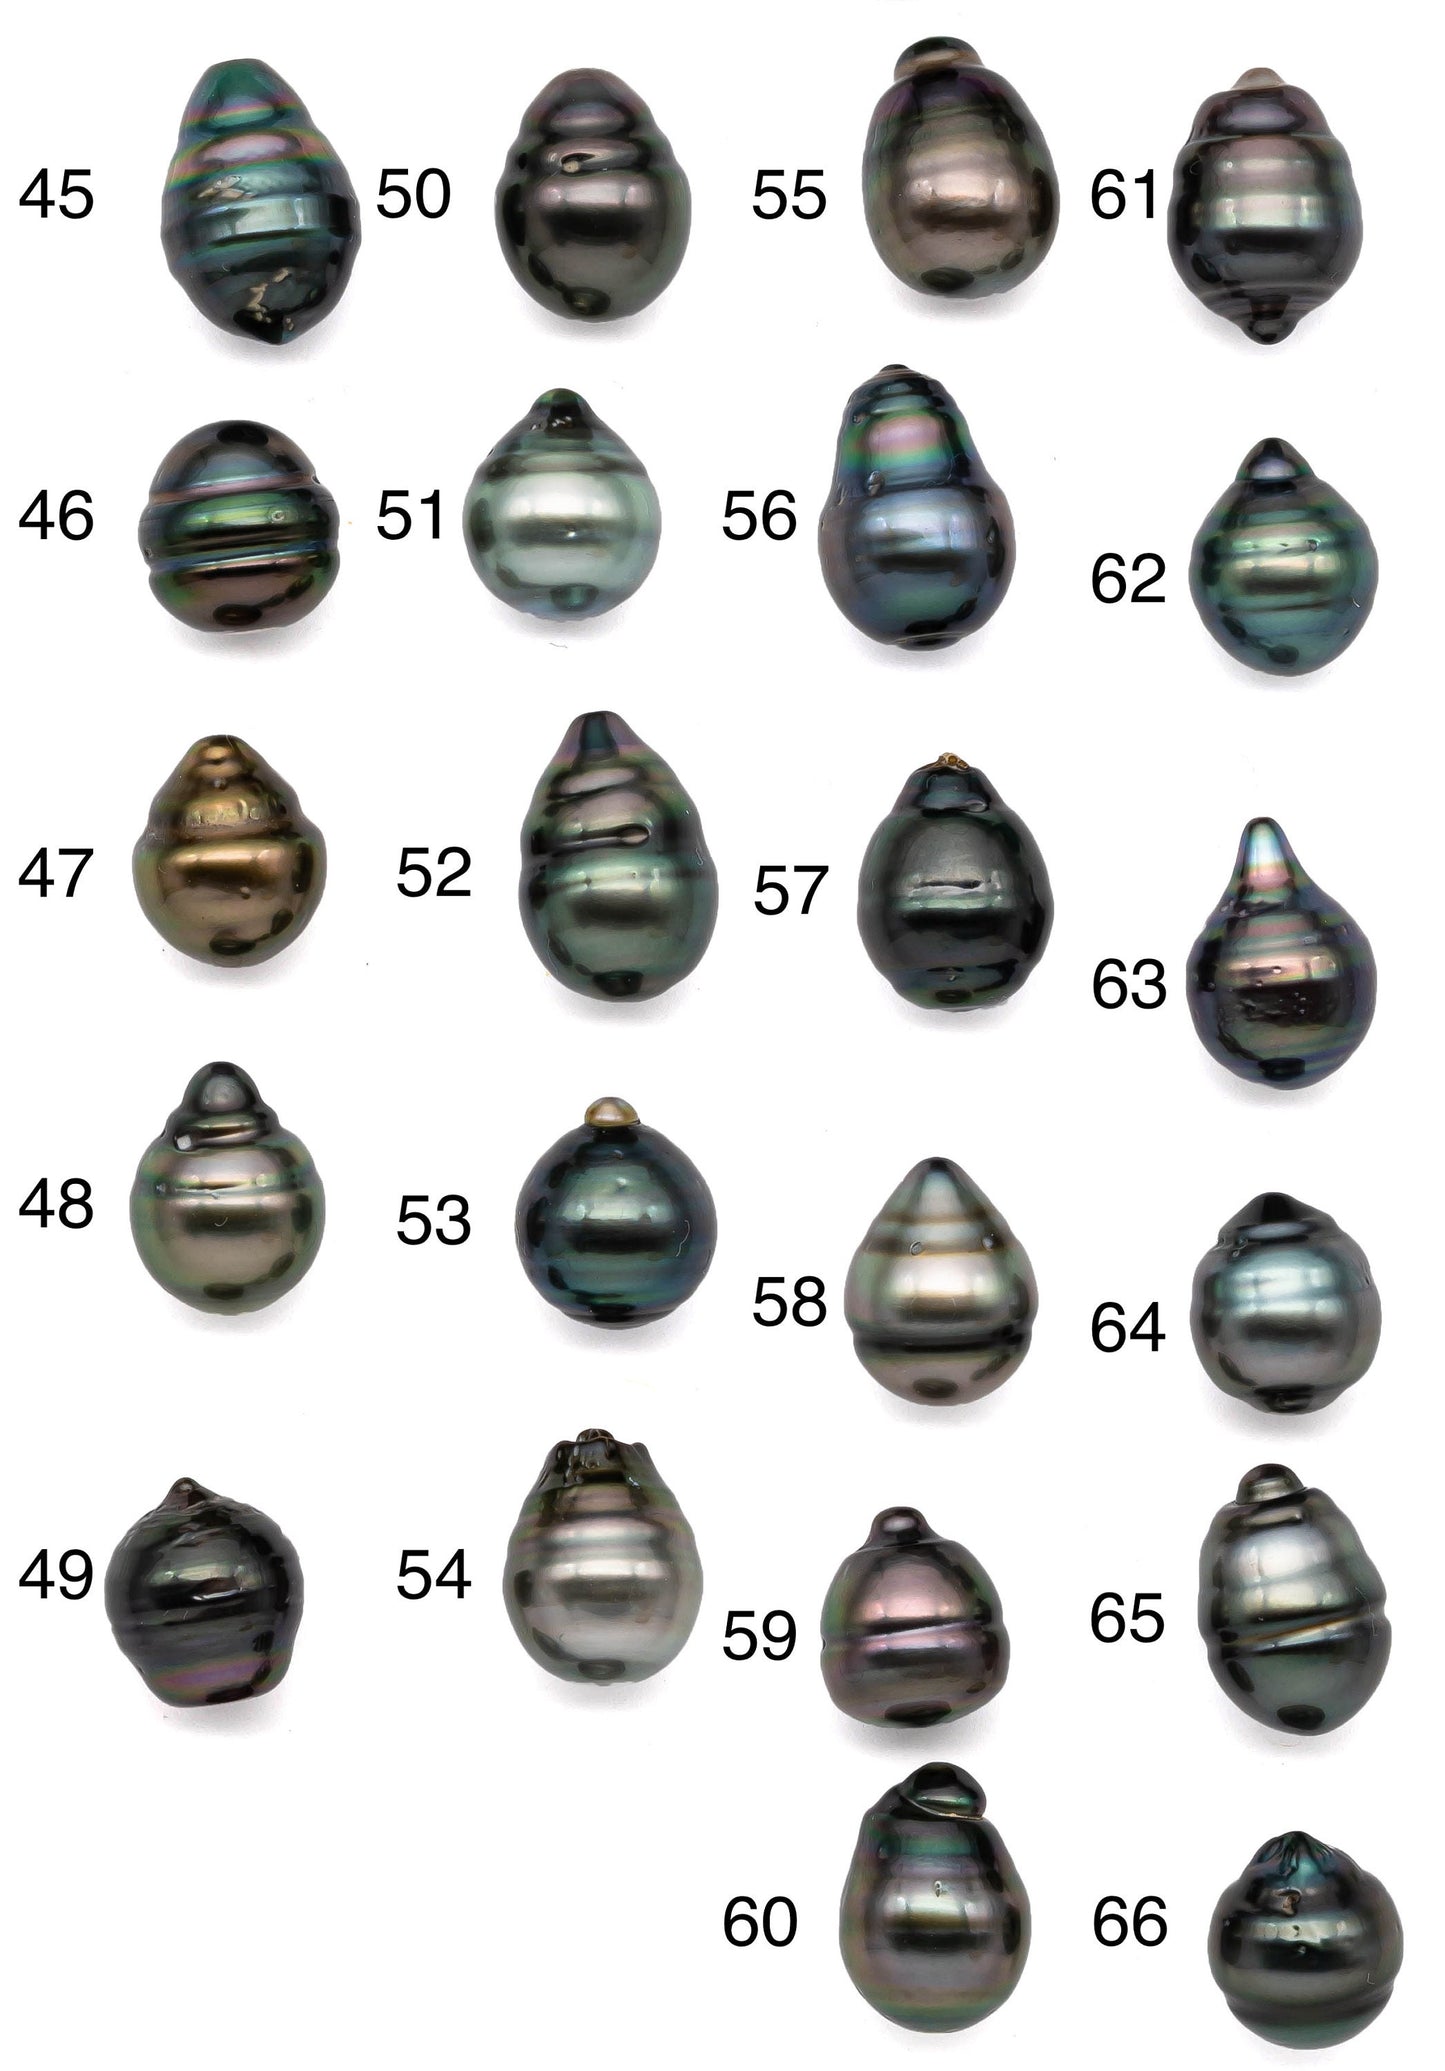 Single Black Tahitian Pearl Drops in Natural Color with High Luster and Blemishes, One Piece Undrilled Pearls, SKU# 1076TH